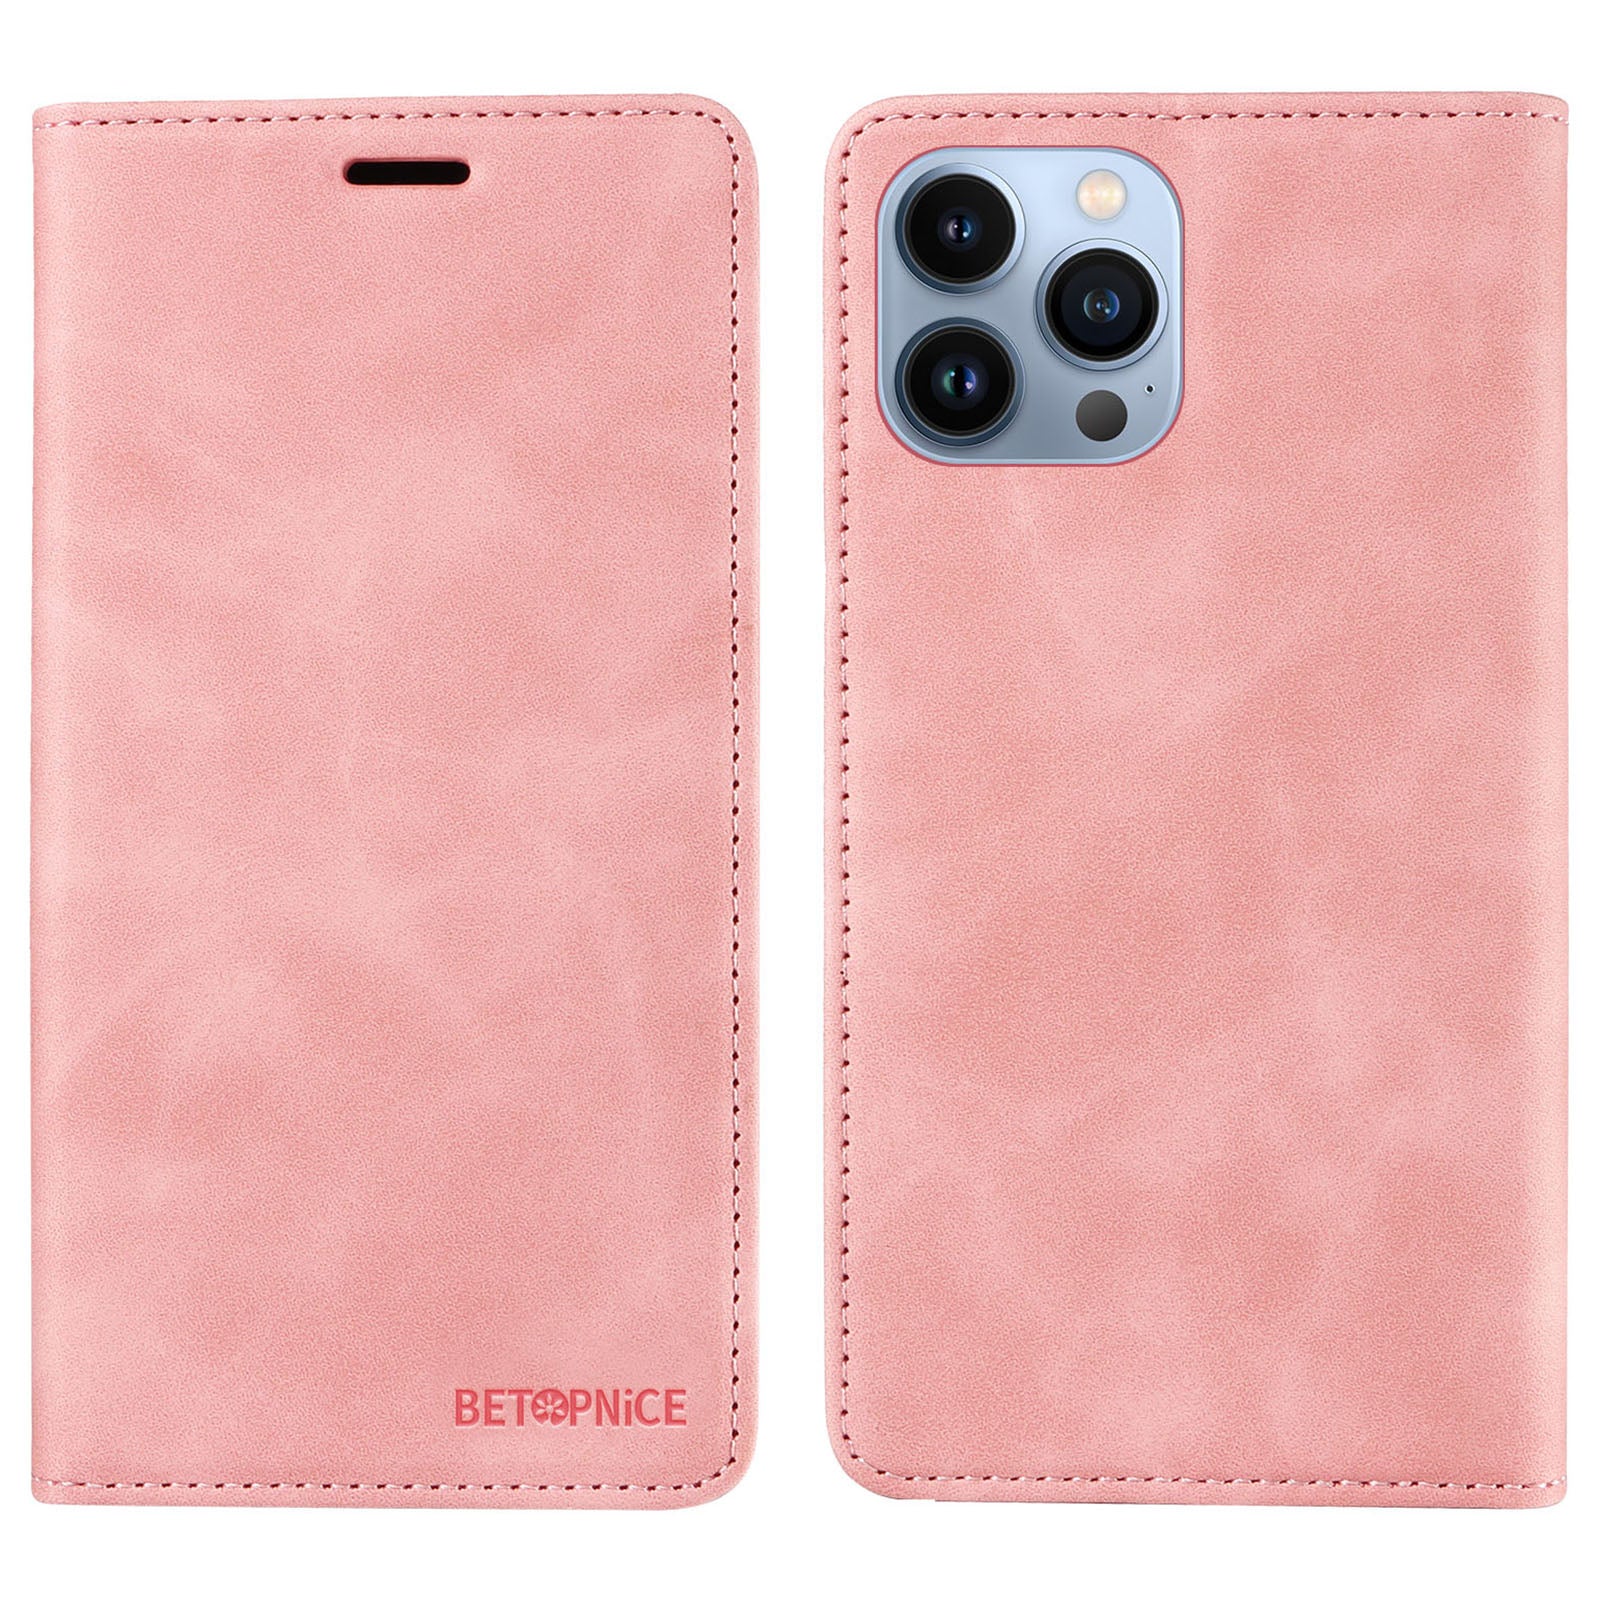 Uniqkart 003 For iPhone 12 Pro Max 6.7 inch Anti-scratch Phone Cover Wallet Leather Stand RFID Blocking Case - Pink